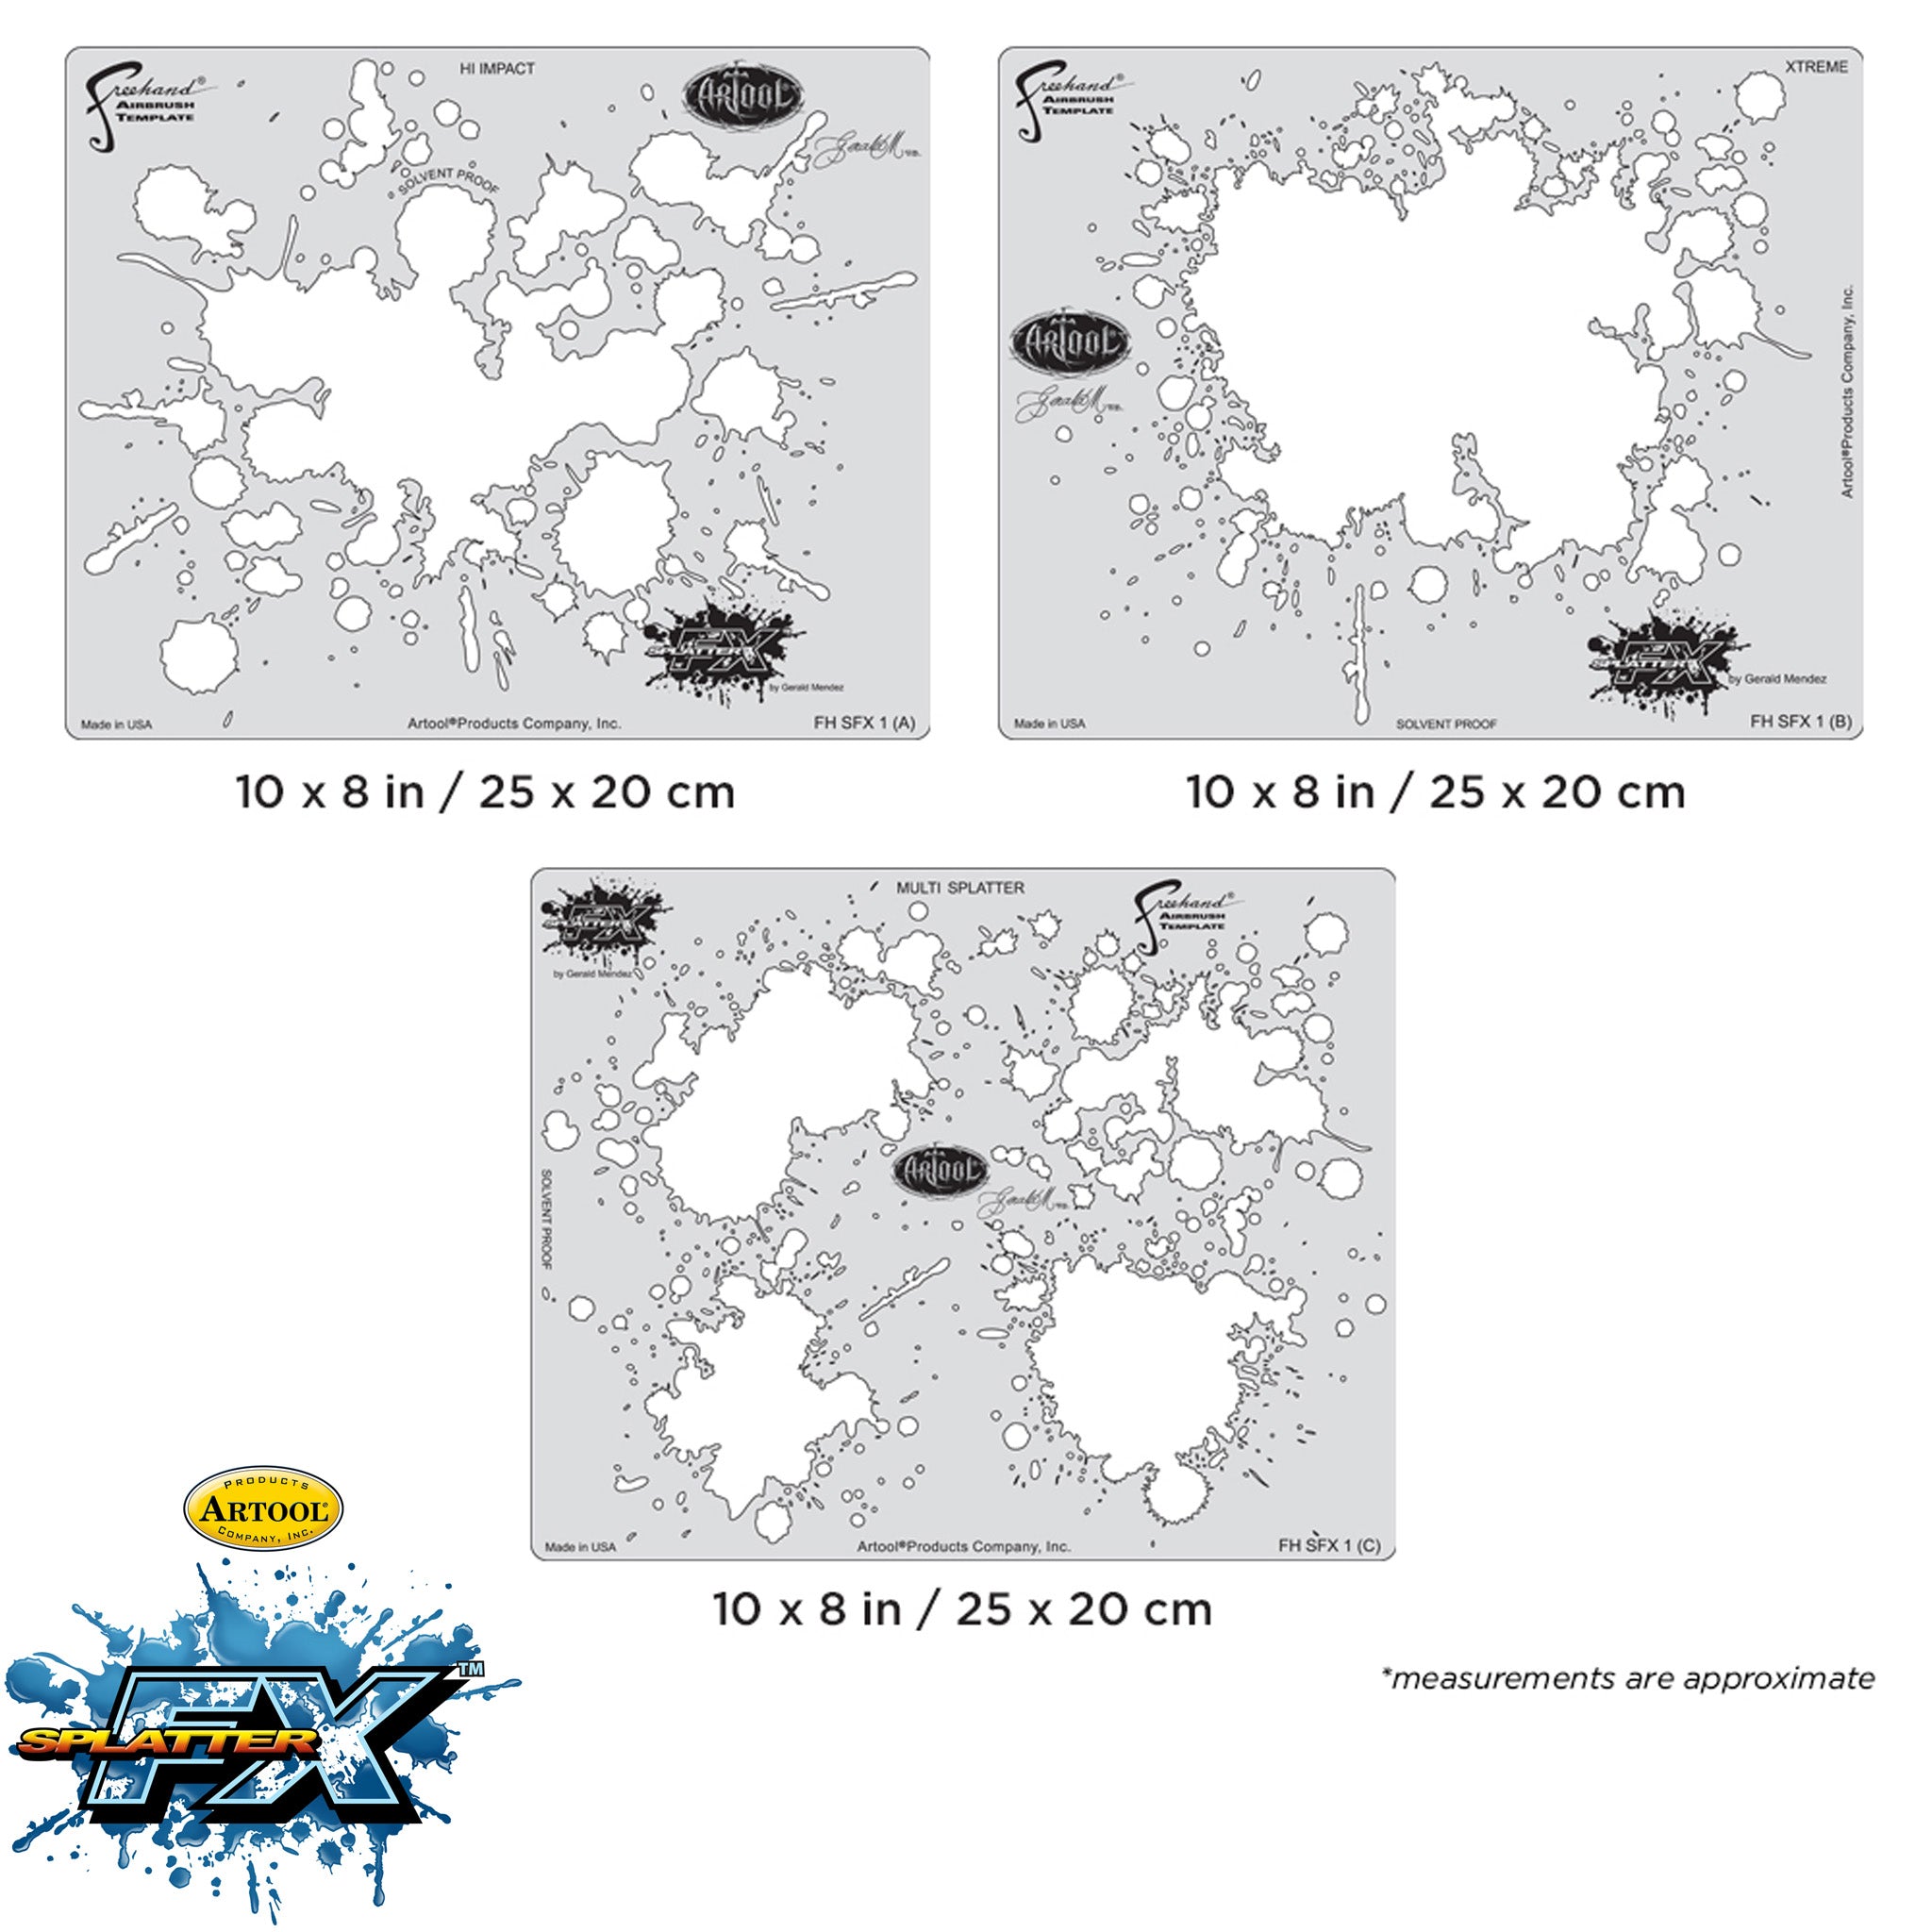 3 in 1 Airbrush template – Airbrush Stencils for spraying stains